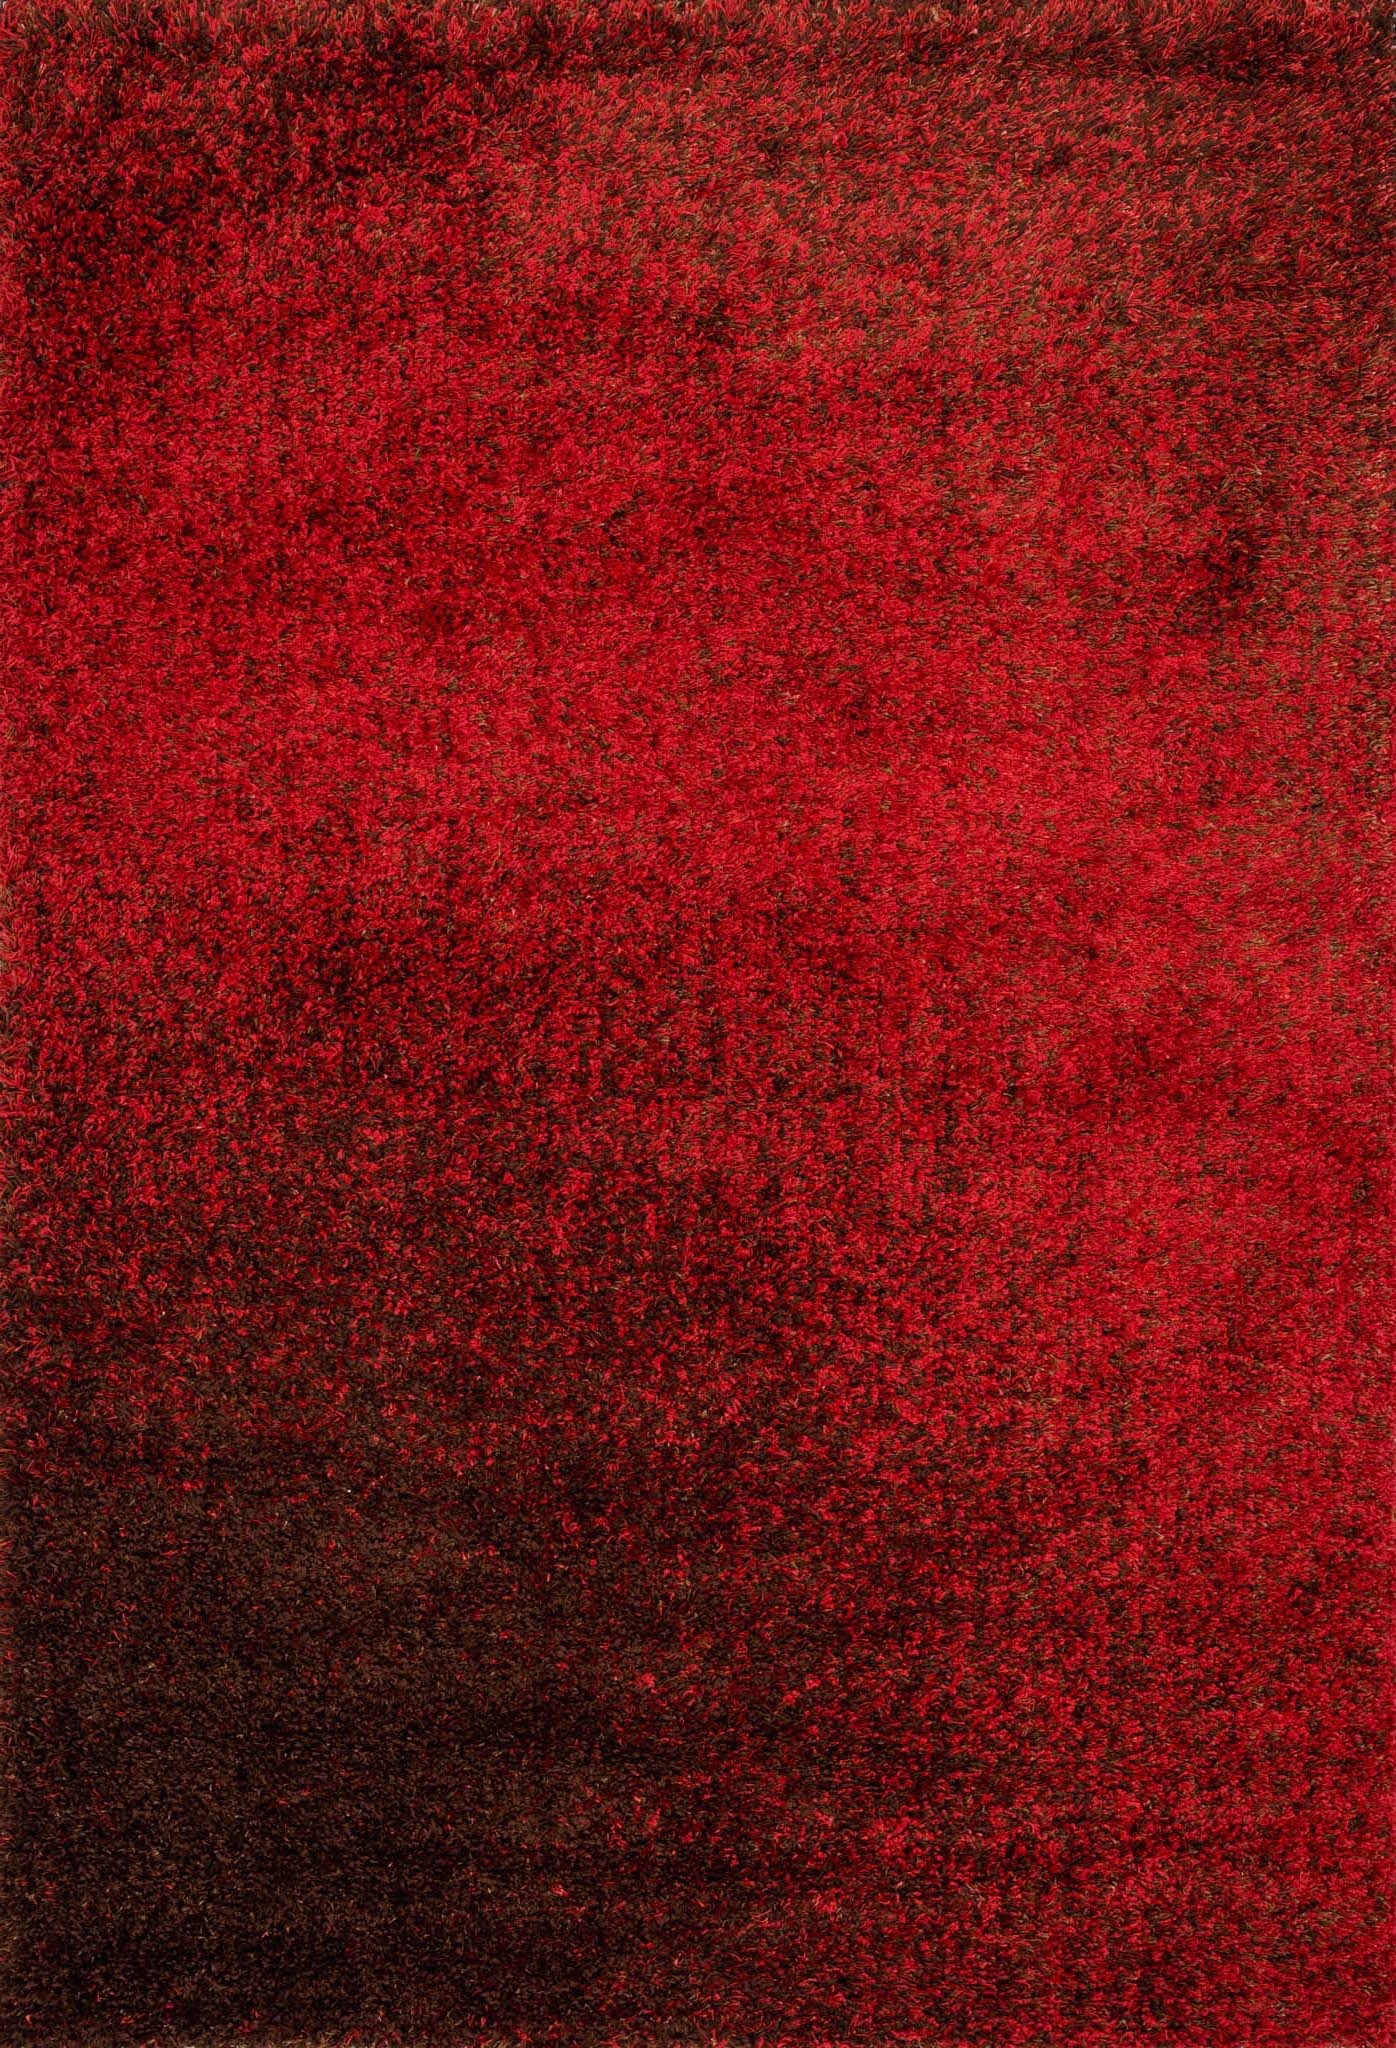 BARCELONA SHAG - RED / BROWN - 1'-6" X 1'-6" Sample Swatch - Image 0